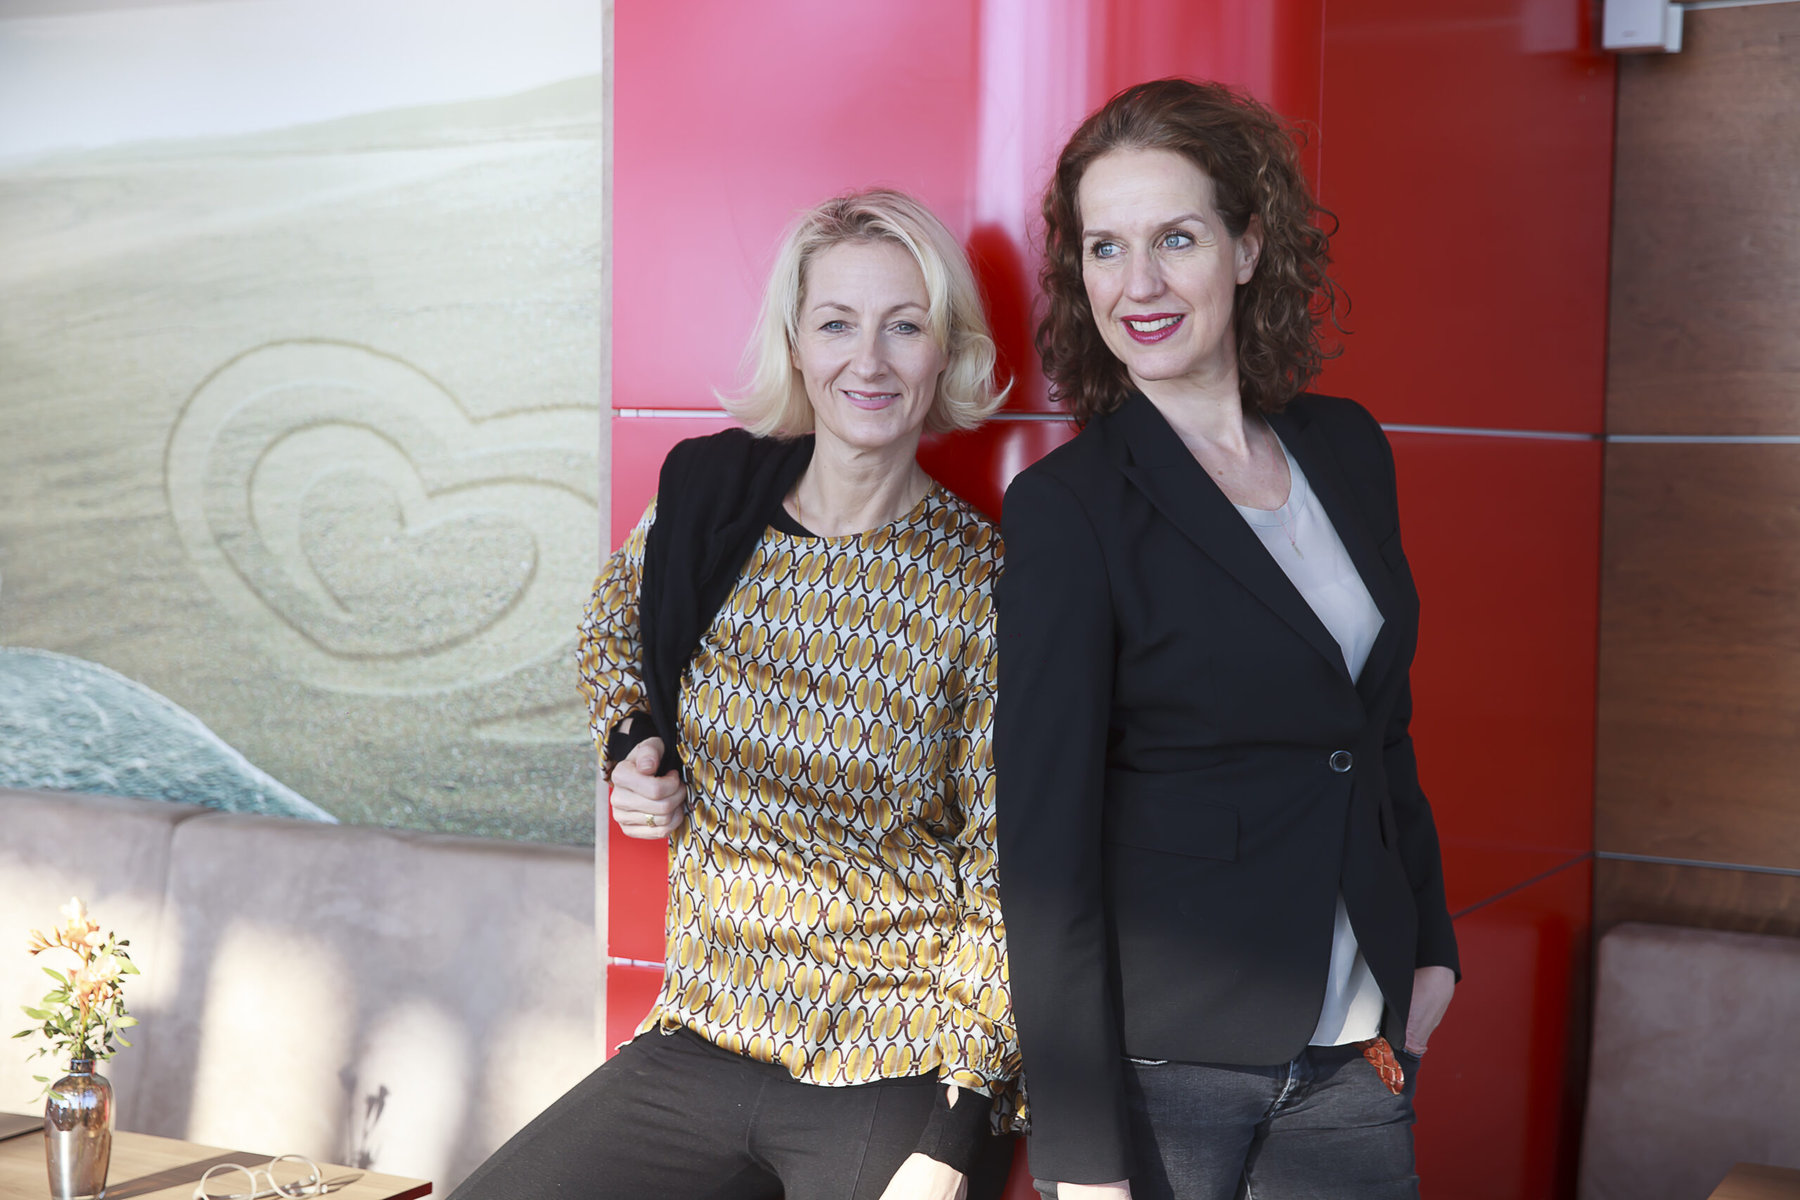 Angela Nelissen (left) and Christiane Haasis (right) pose in businesswear against a red background.